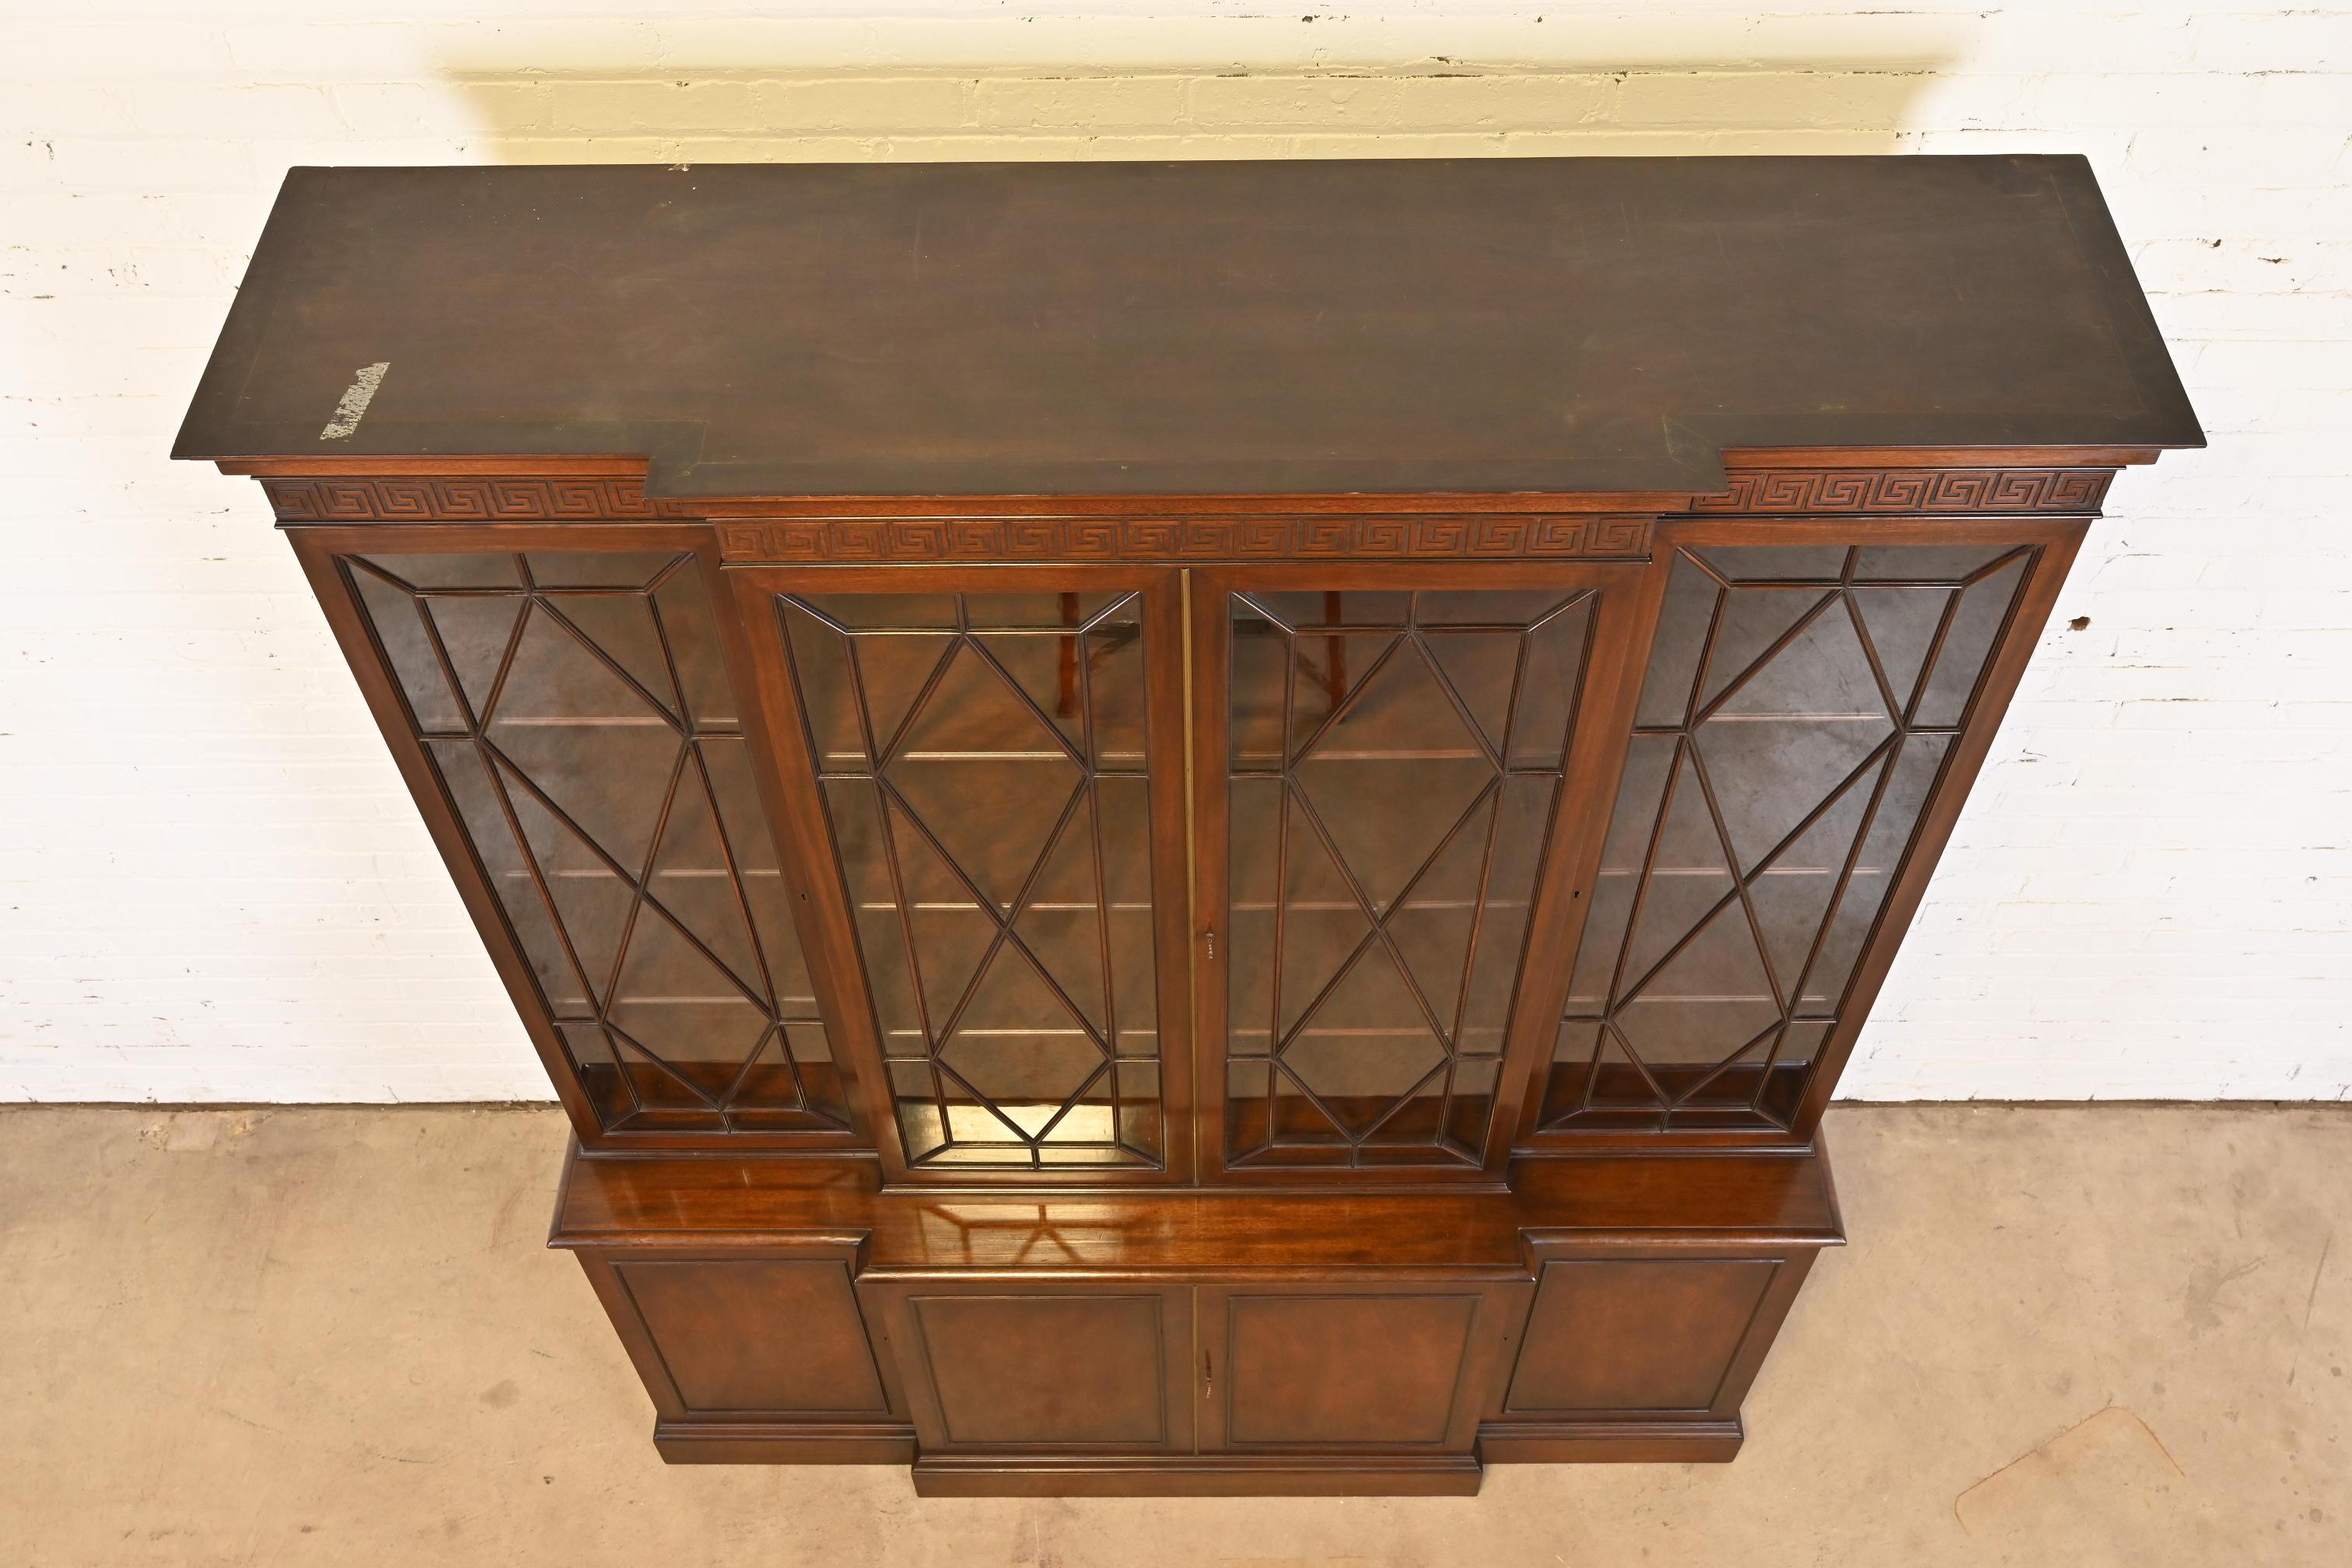 Schmieg & Kotzian Georgian Carved Mahogany Breakfront Bookcase Cabinet, 1940s For Sale 2